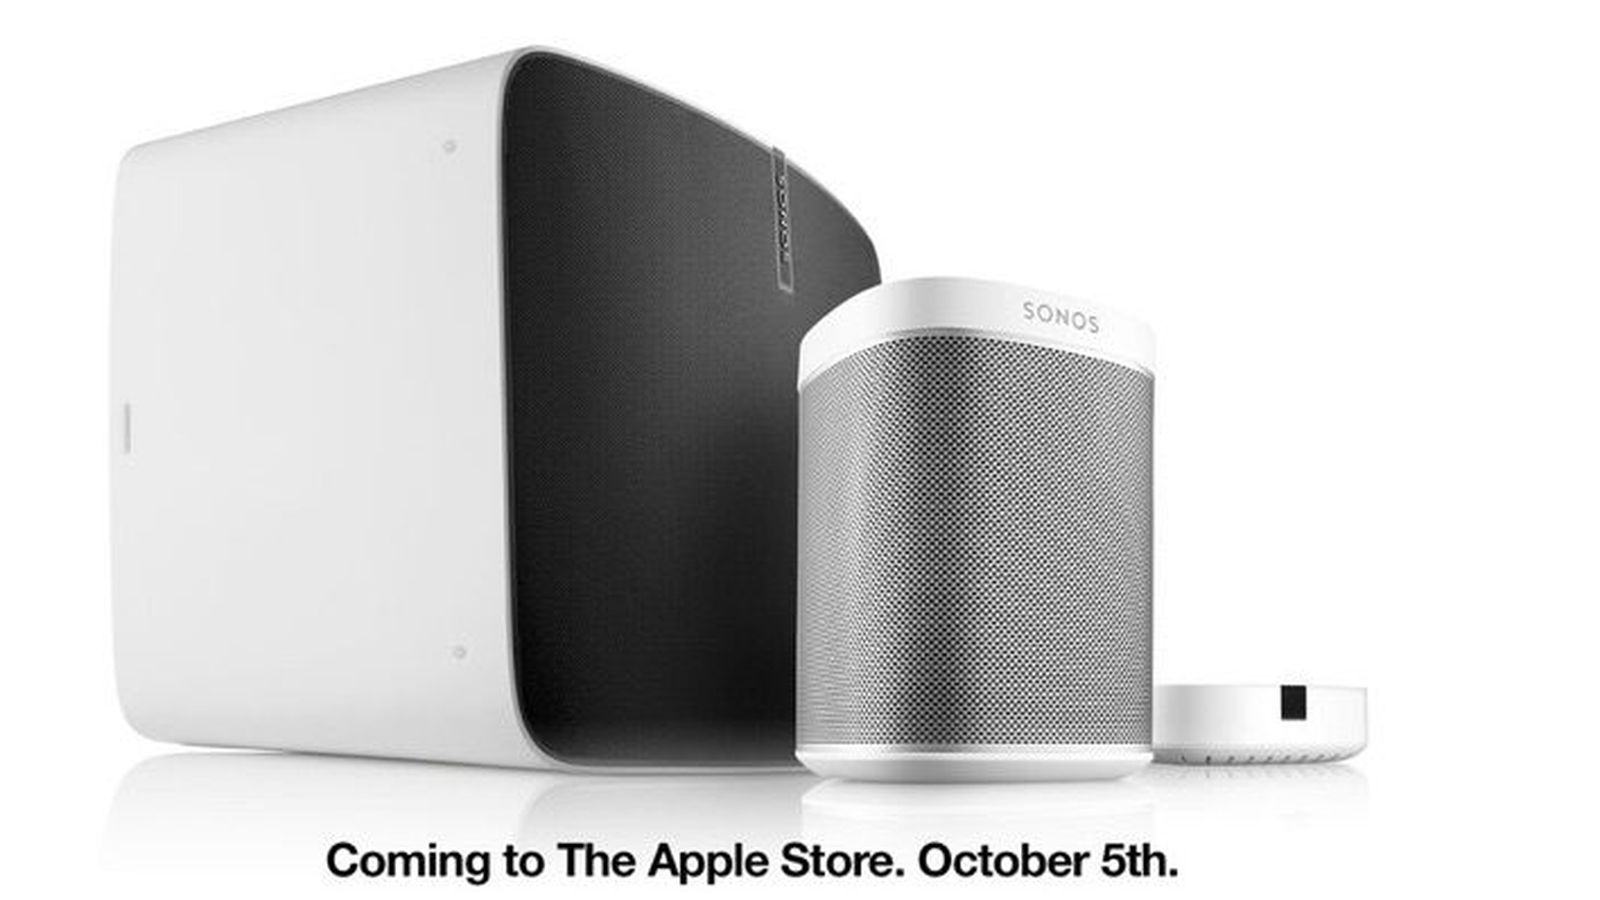 Sonos to Apple Online Store Today, Retail Stores on October 5 - MacRumors